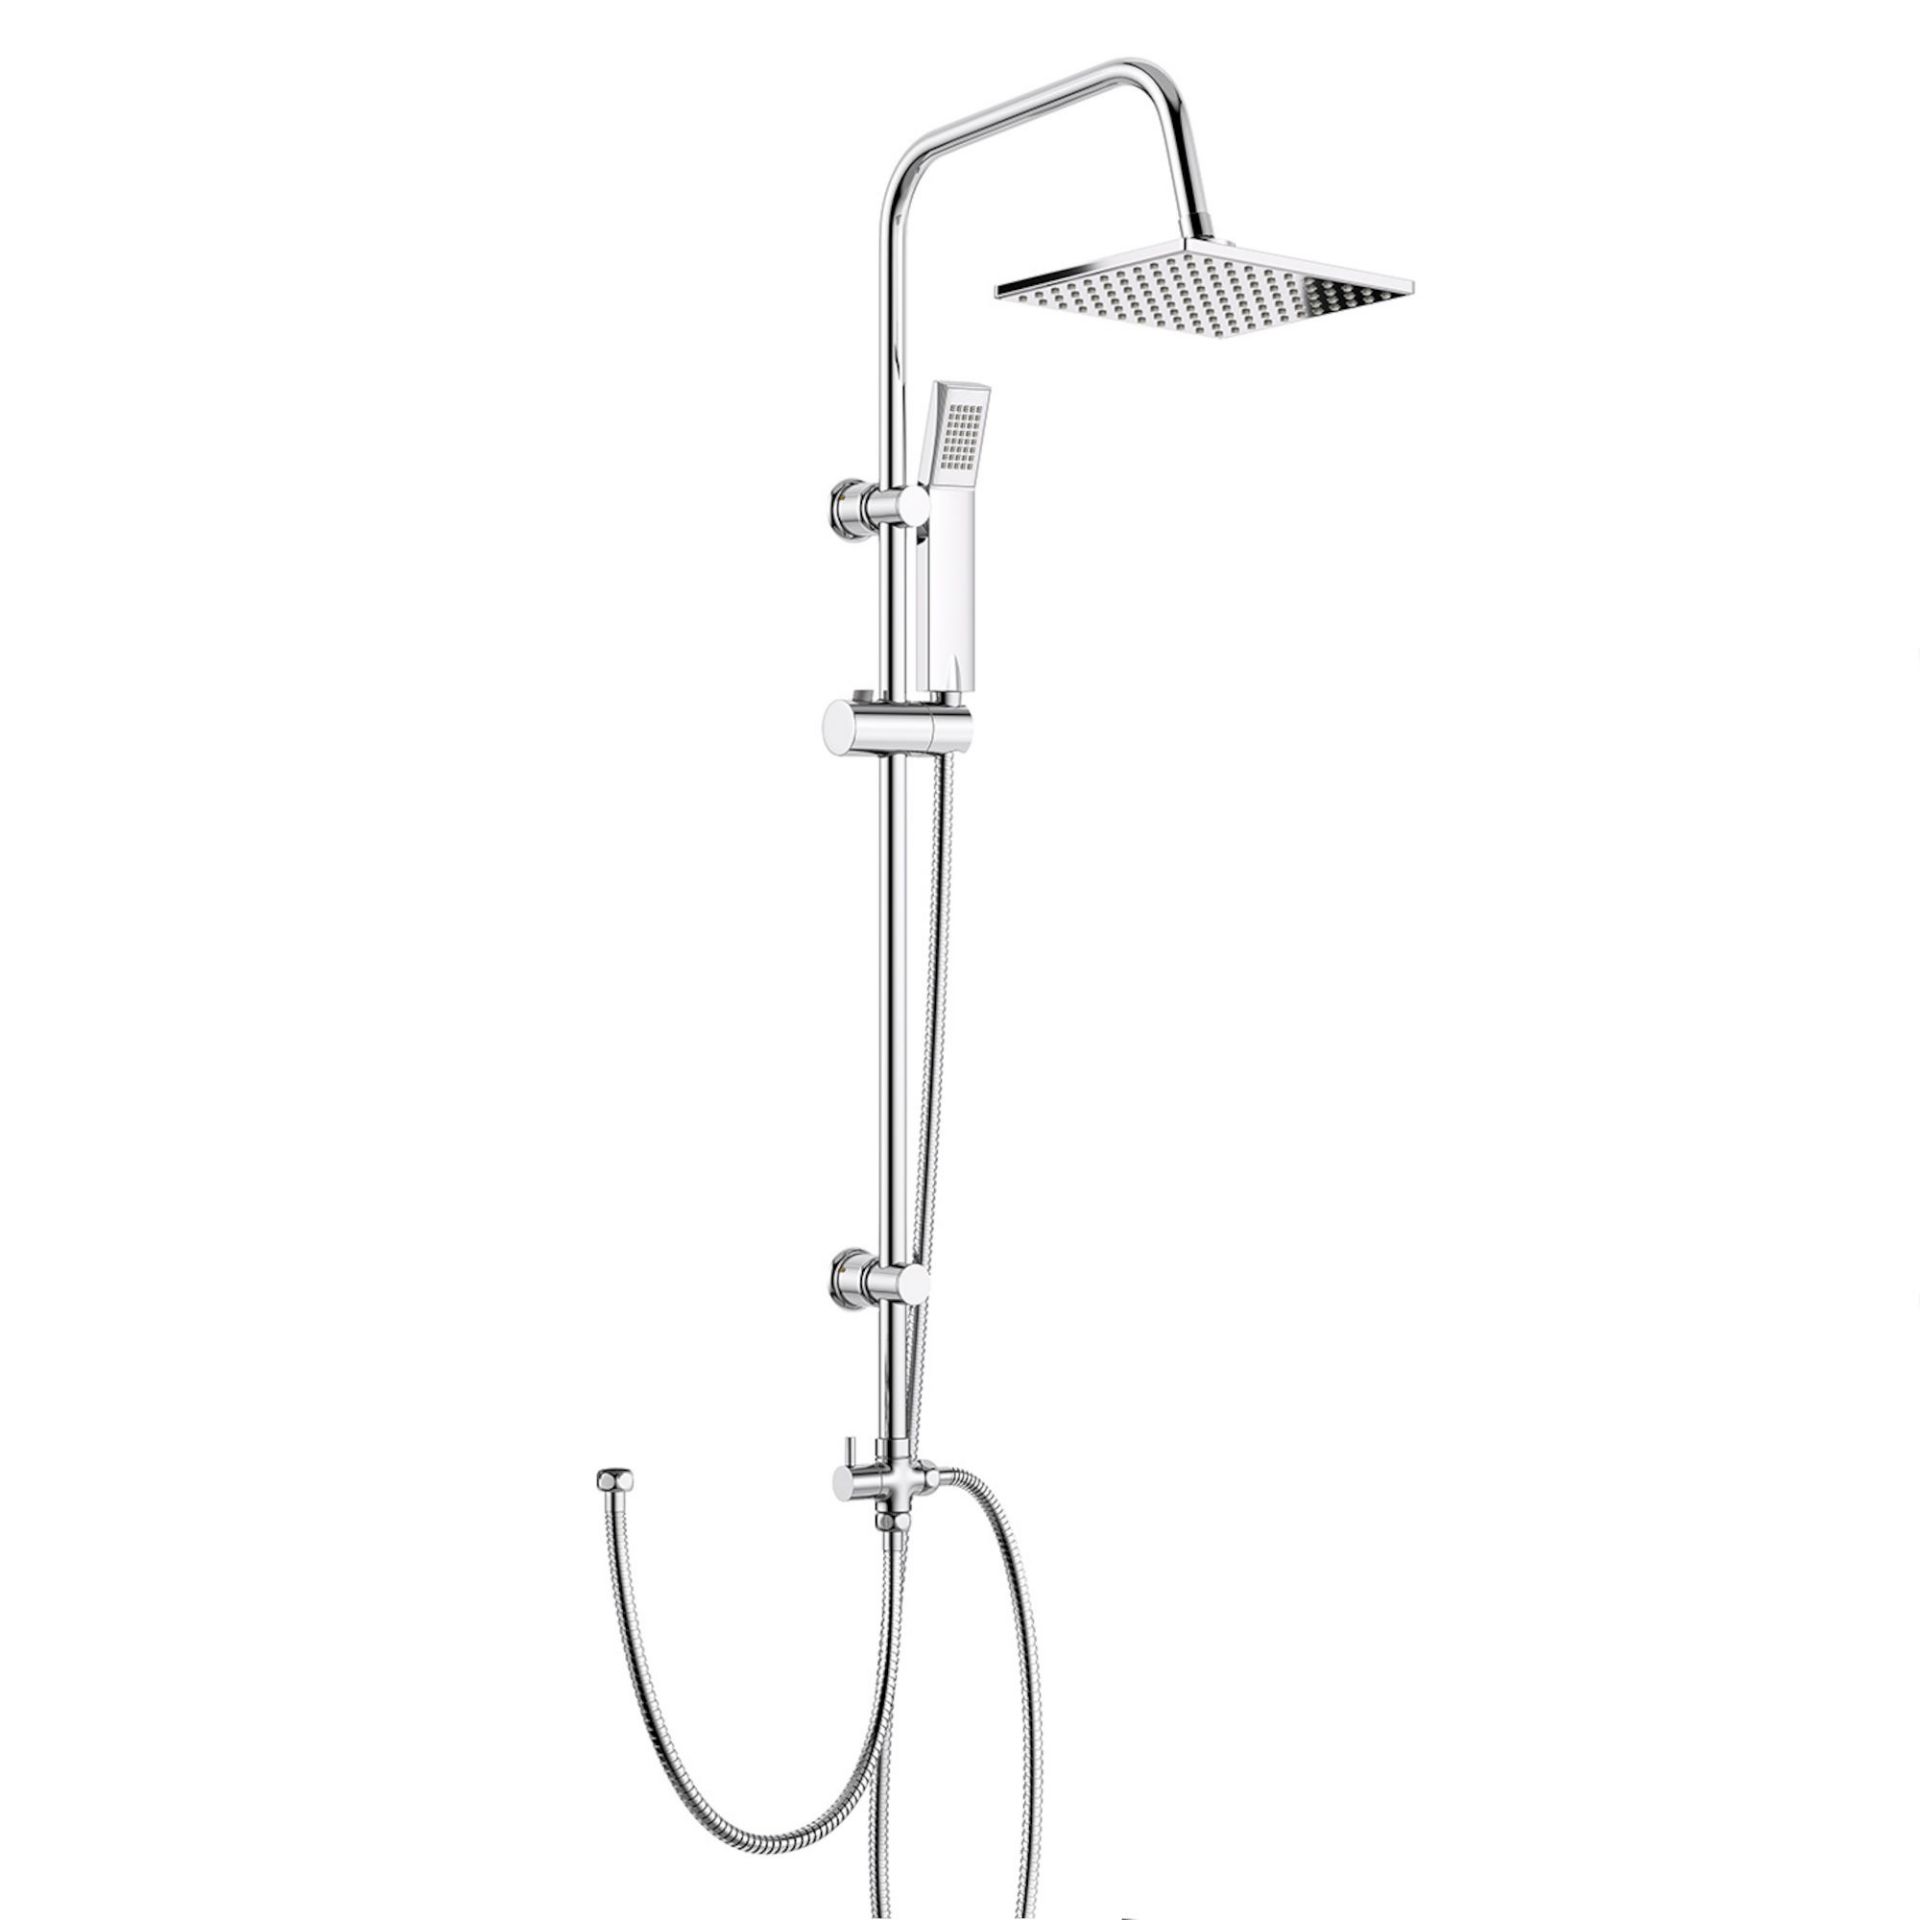 200mm Square Head, Riser Rail & Handheld Kit Quality stainless steel shower head with Easy Cle... - Image 3 of 4